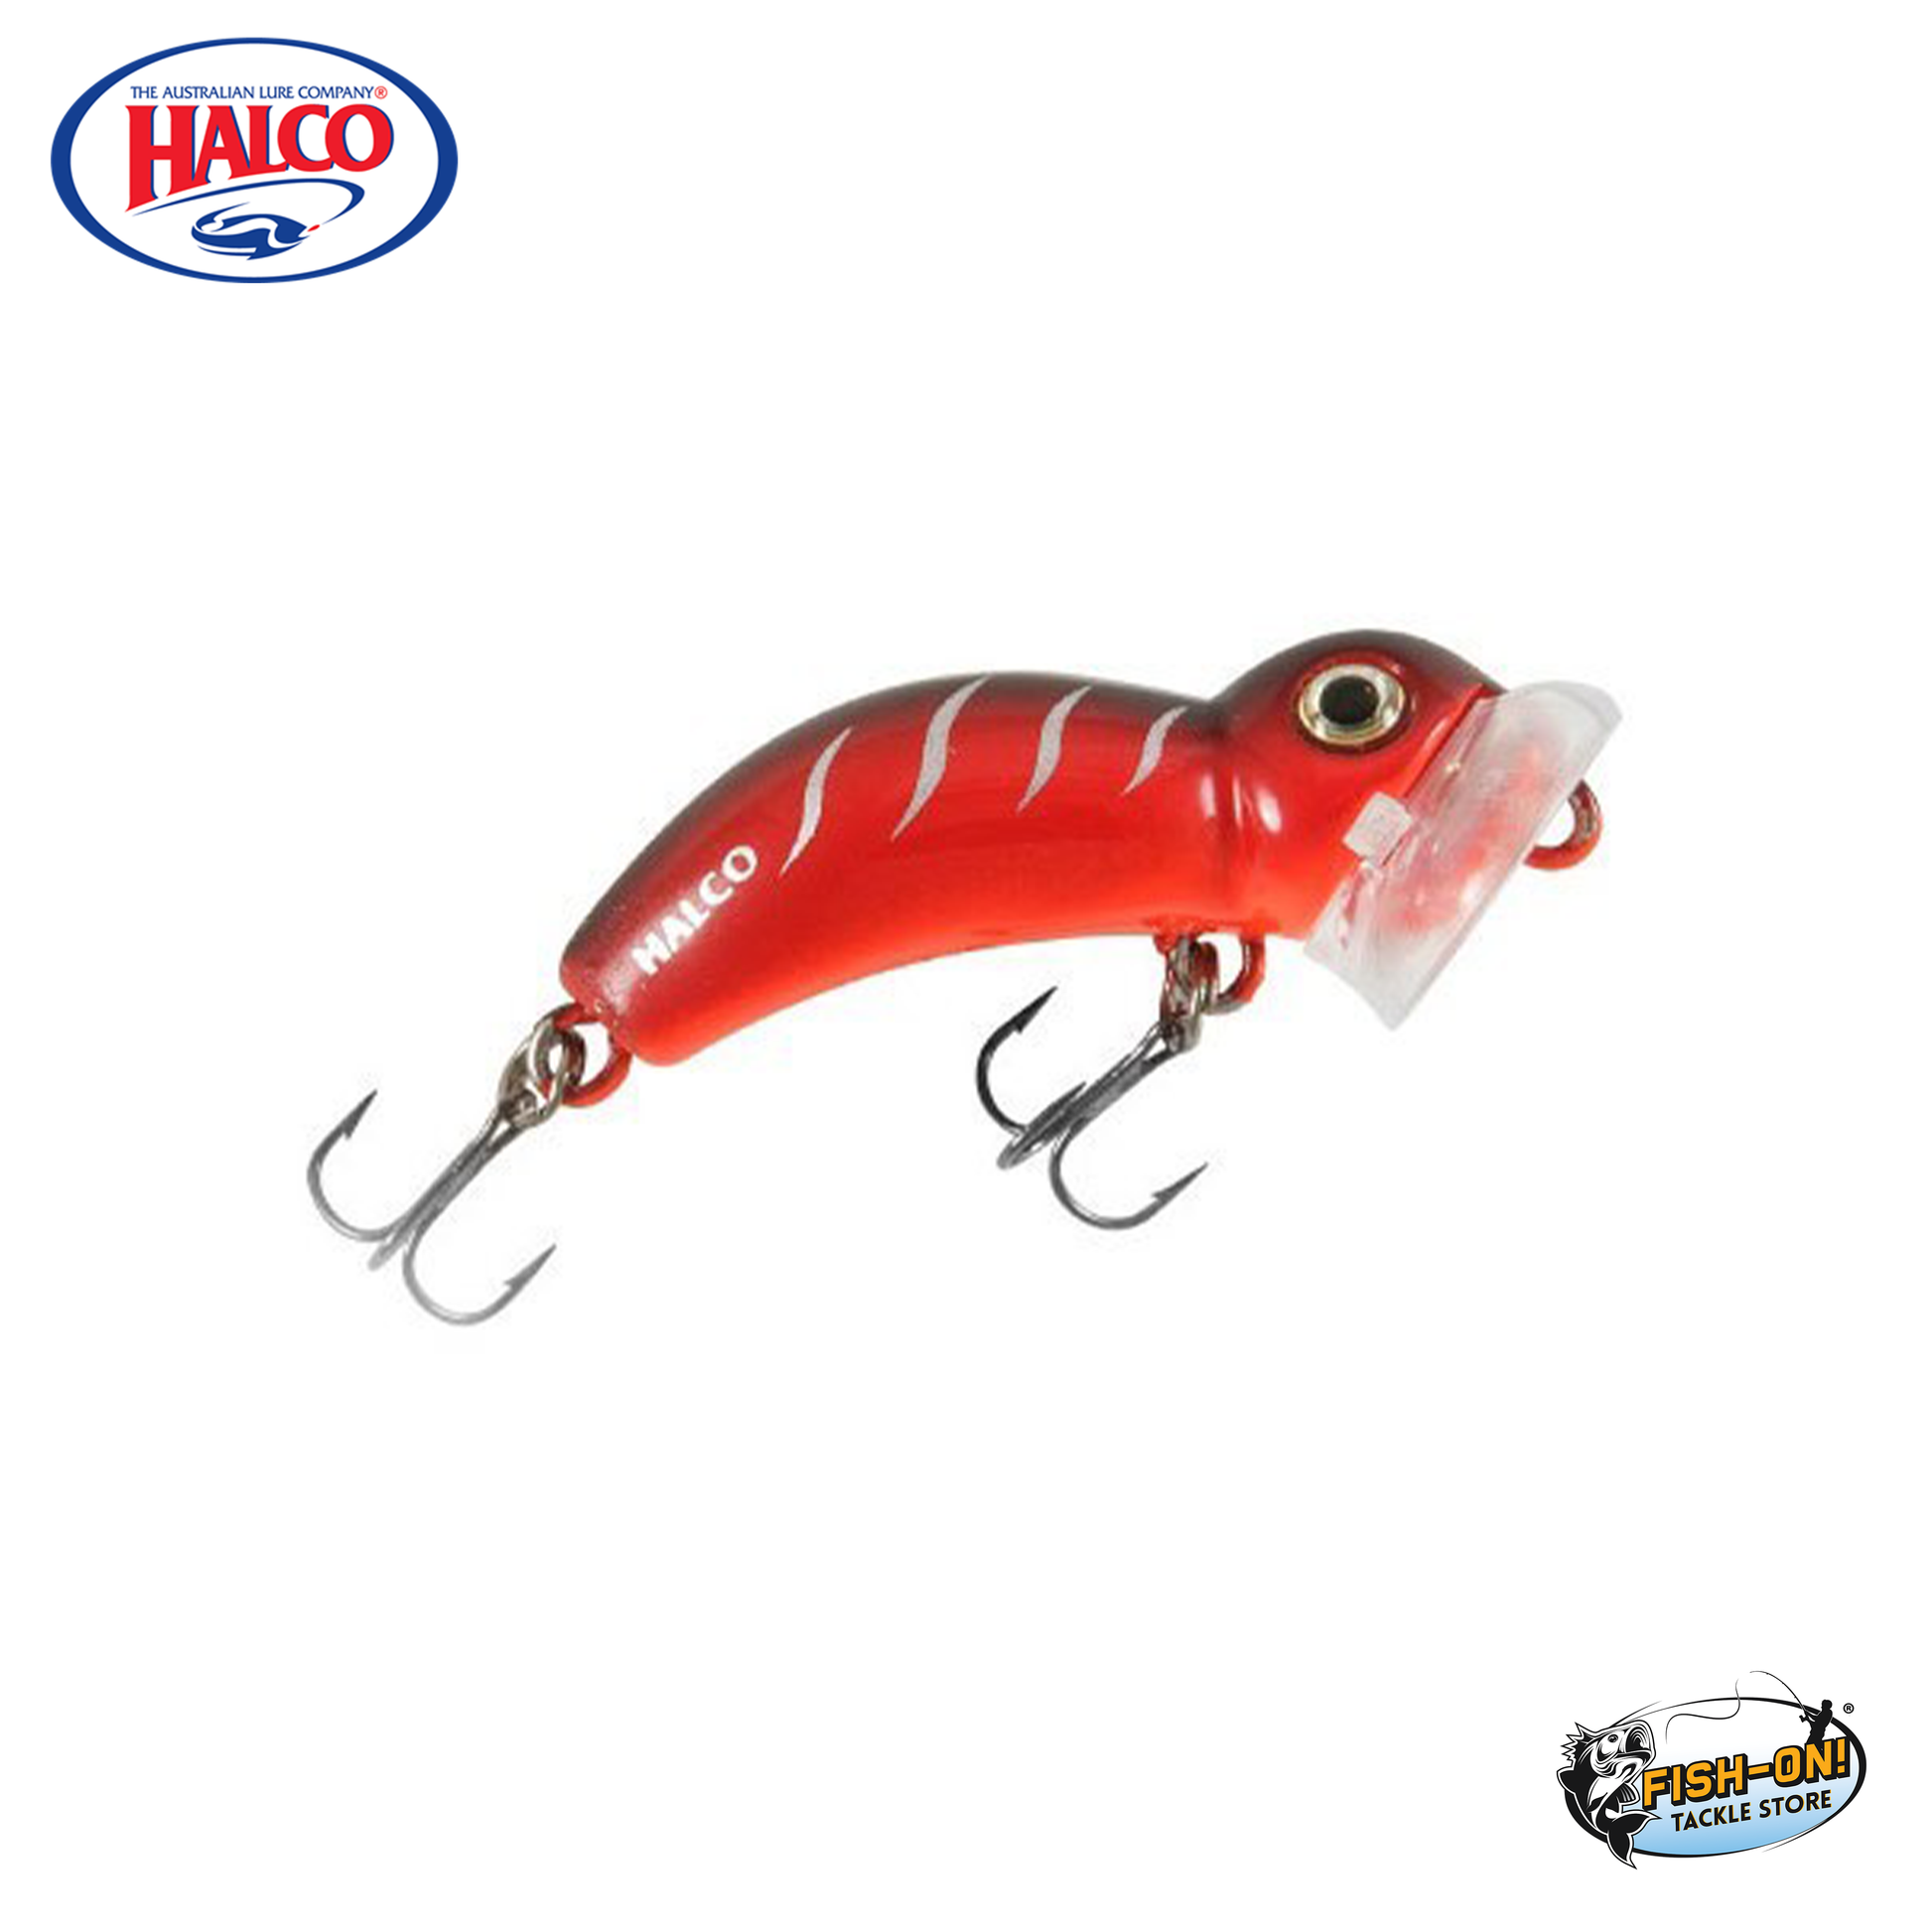 Halco Night Walker – Fish-On Tackle Store